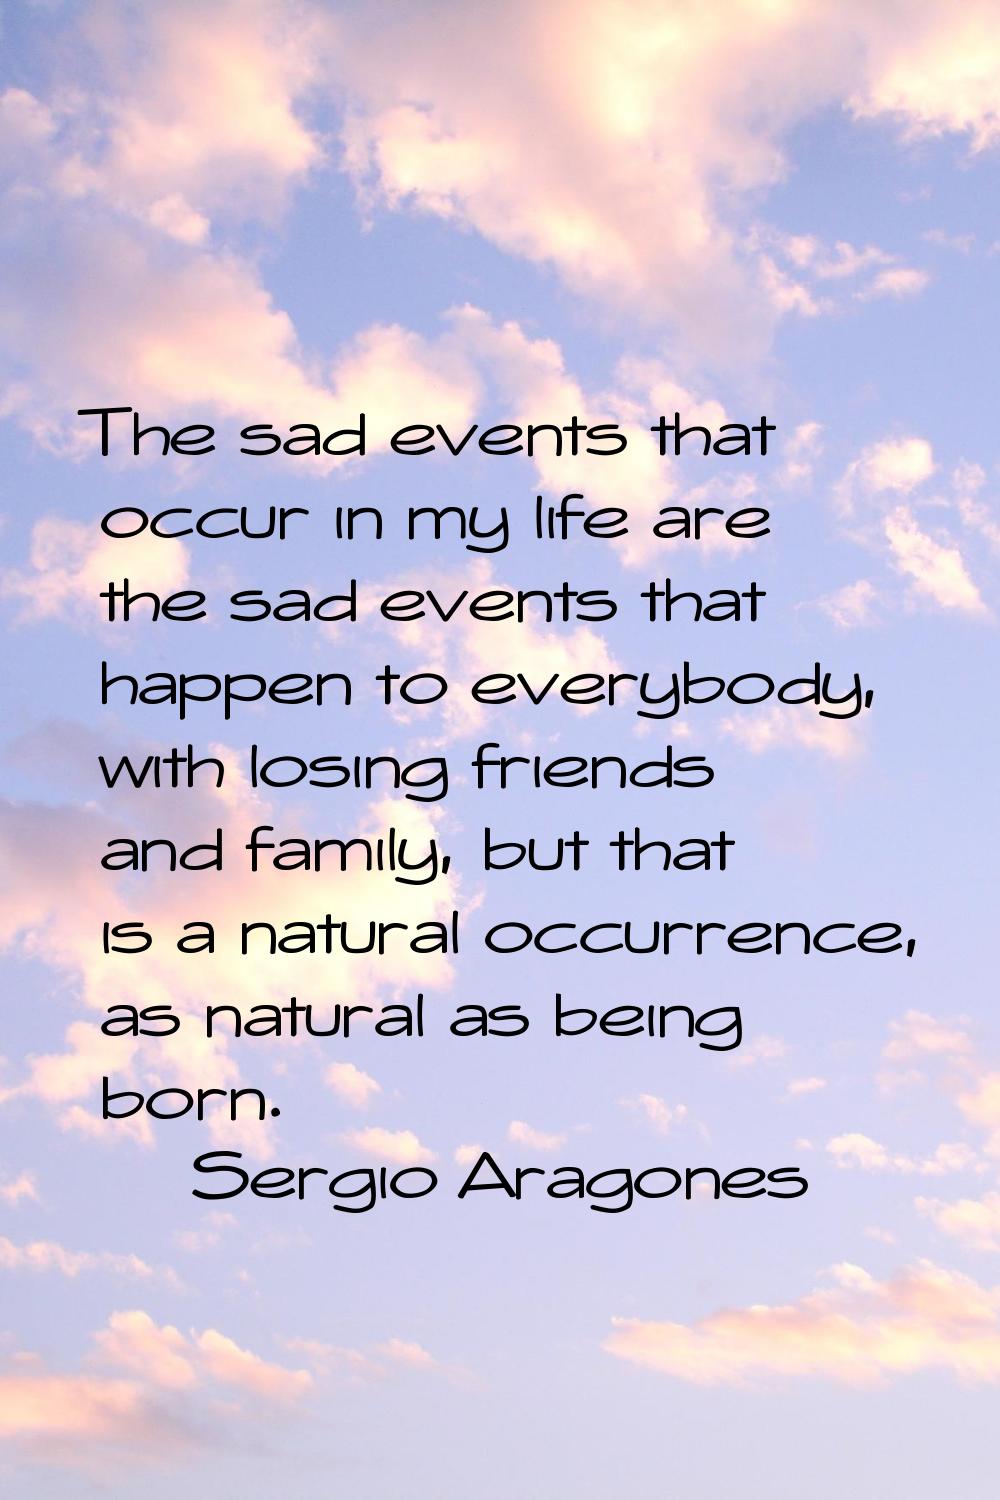 The sad events that occur in my life are the sad events that happen to everybody, with losing frien